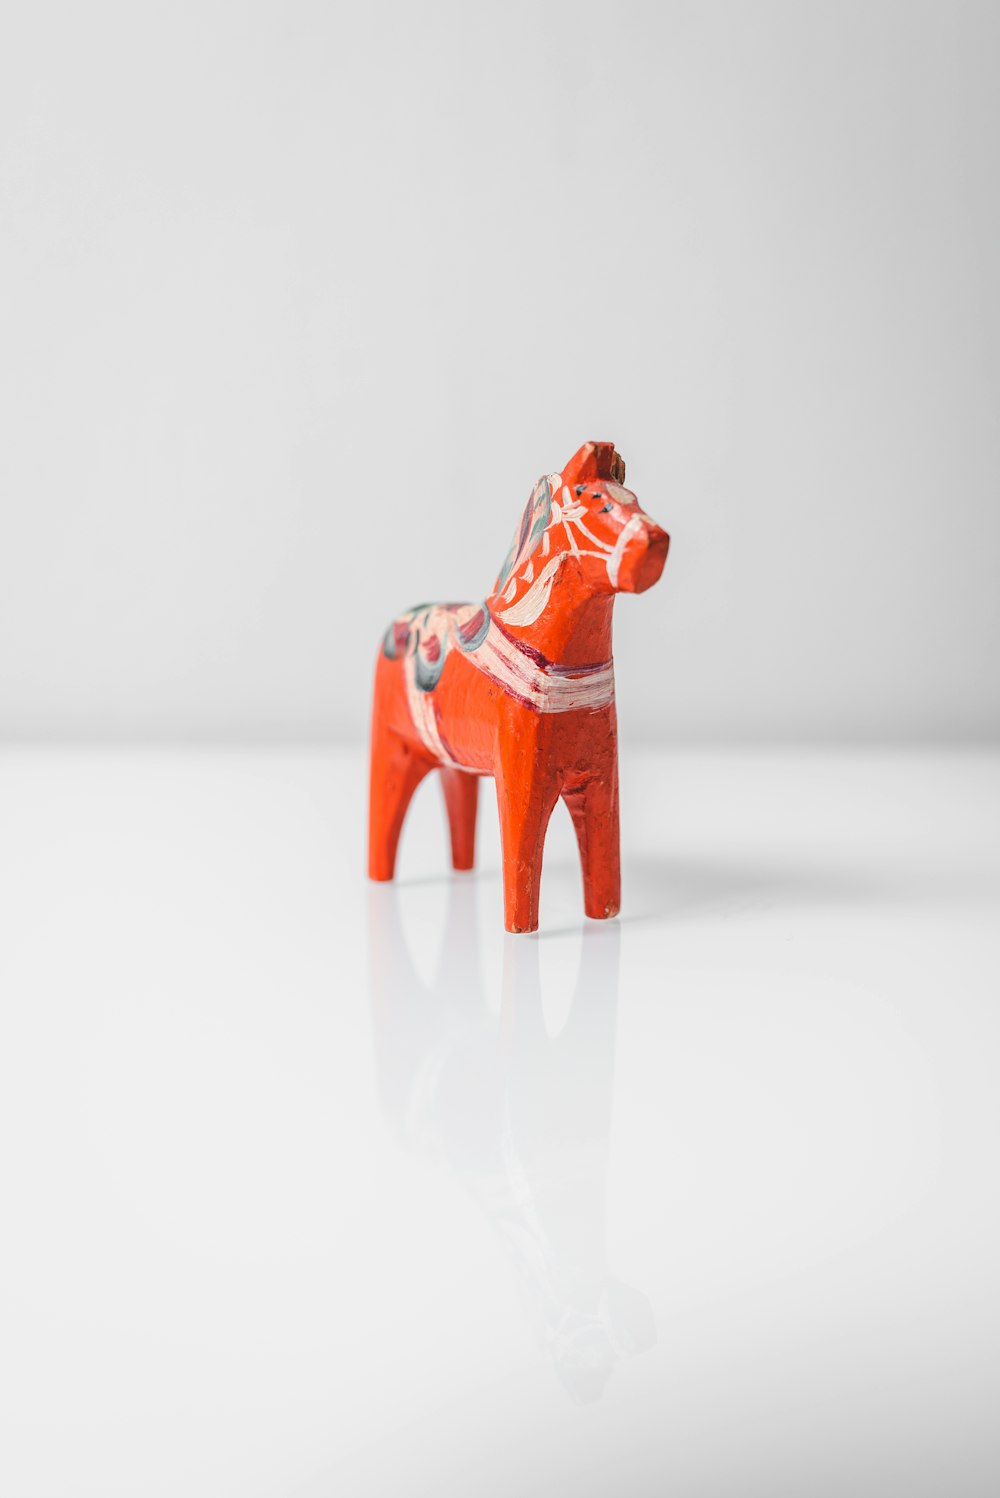 red ceramic figurine on white surface